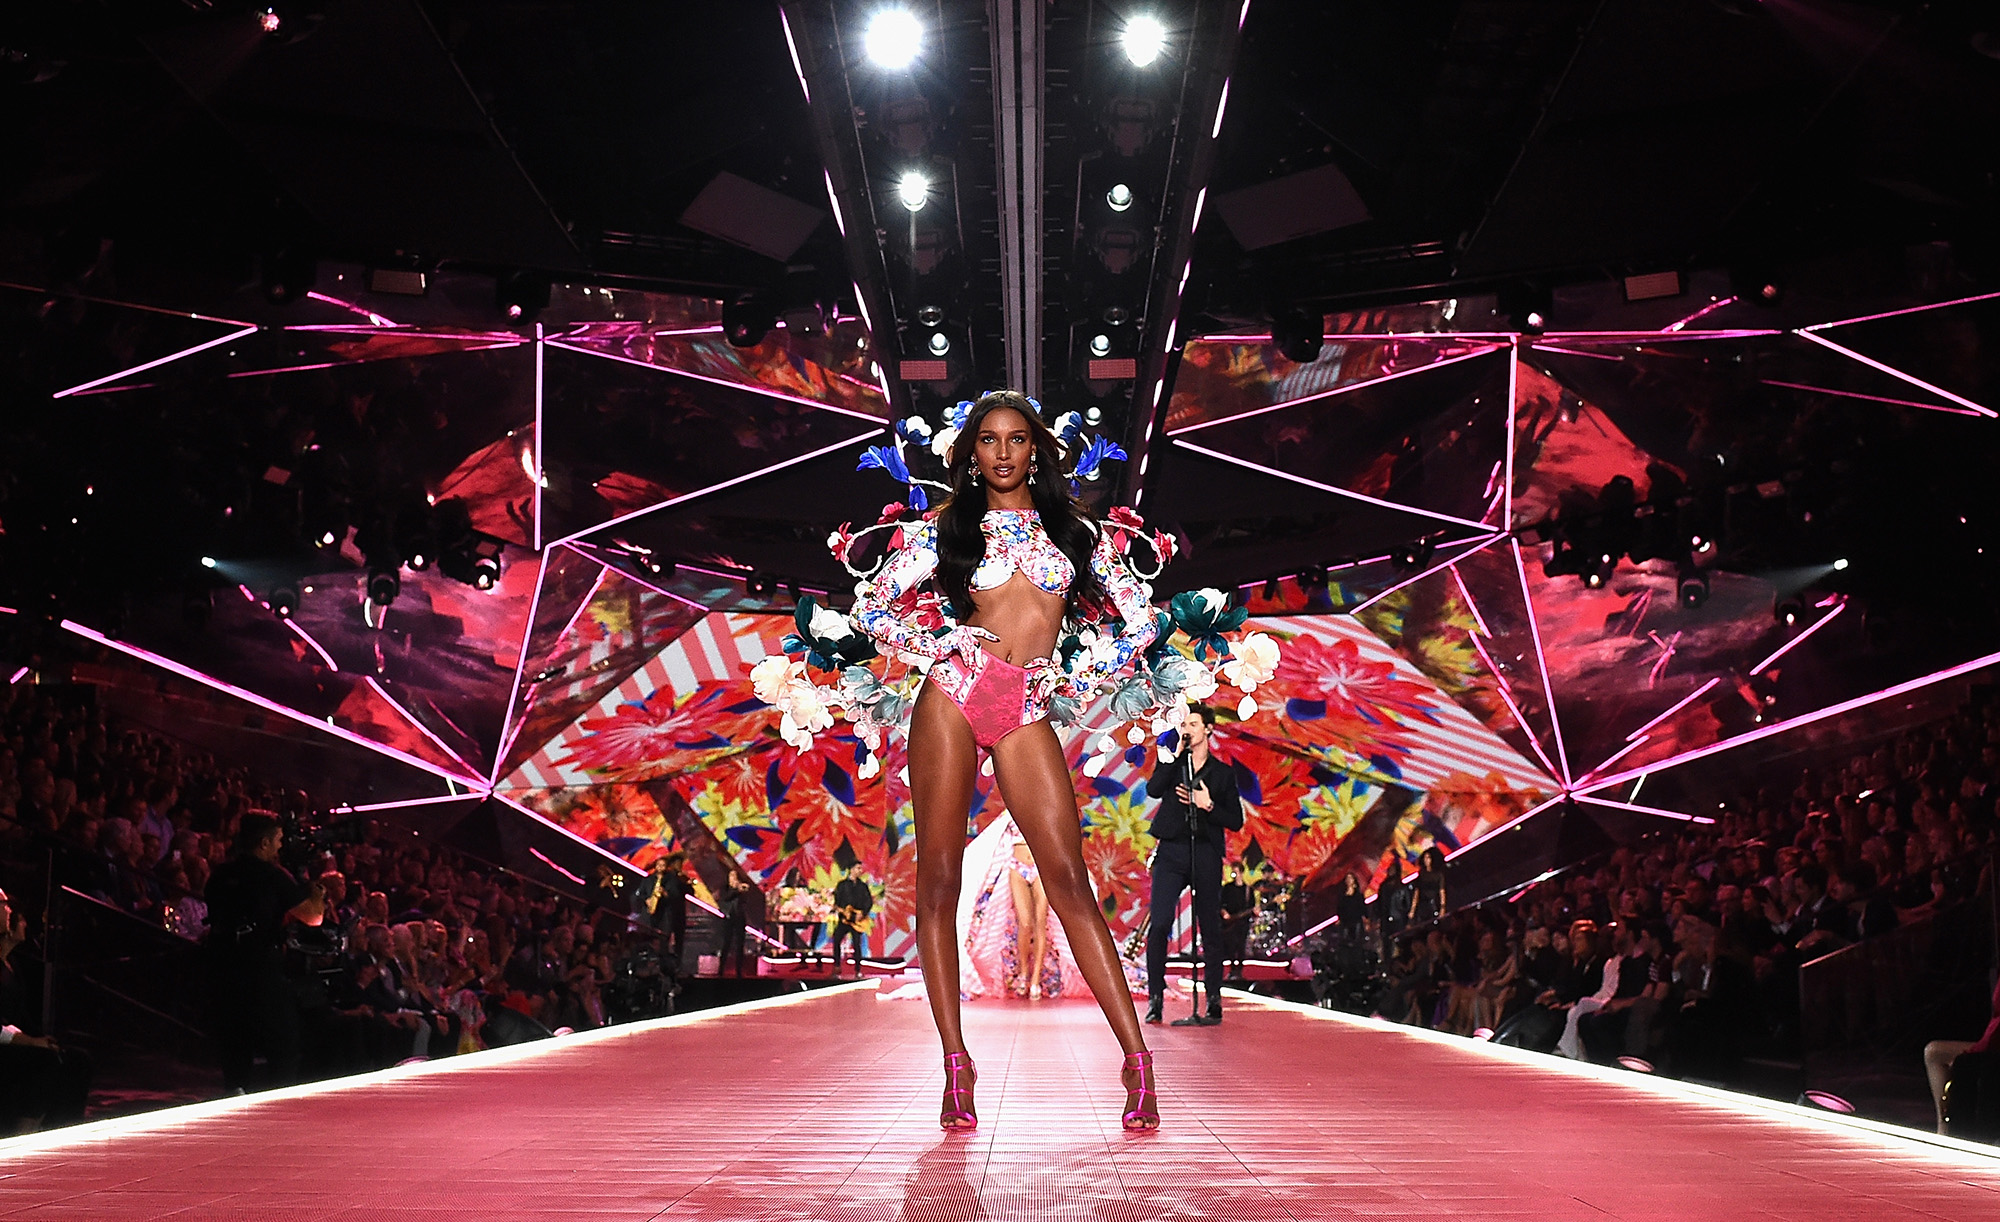 Victoria's Secret Fashion Show 2019? Won't Be On TV This Year